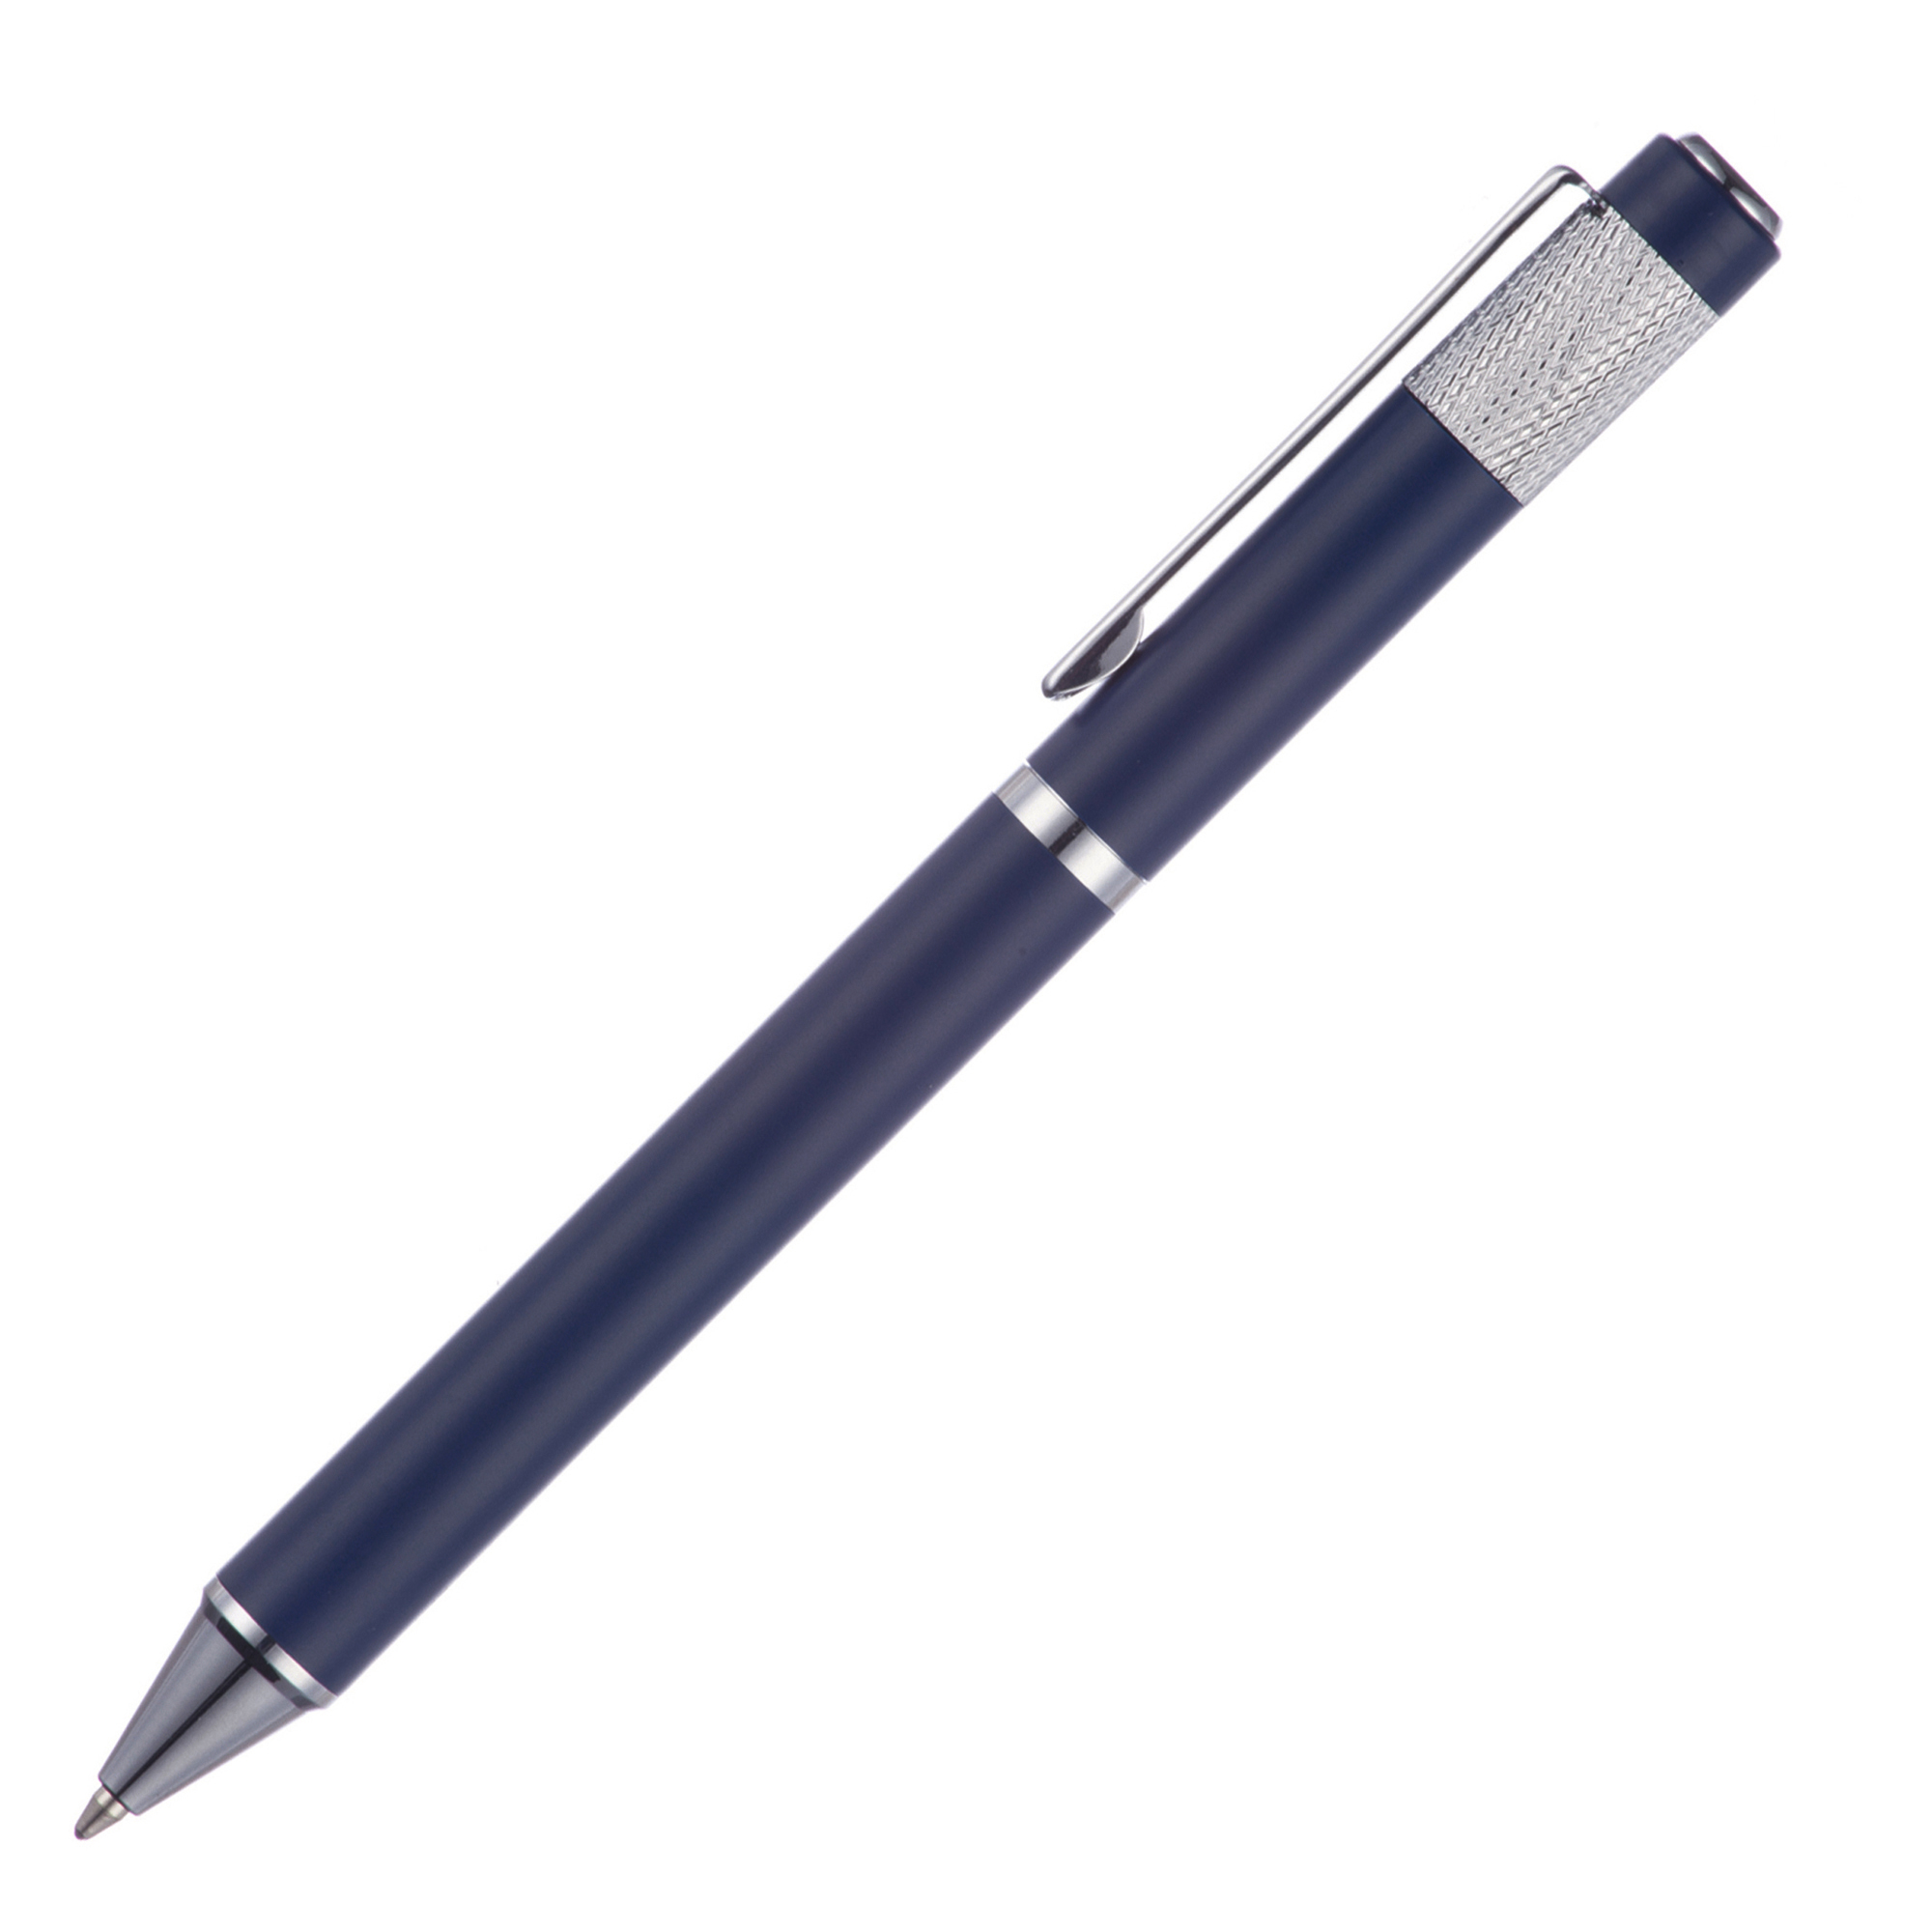 A substantial twist action ball pen. The matt dark blue and black versions are undercoated chrome for a mirror engrave finish if engraving is required.